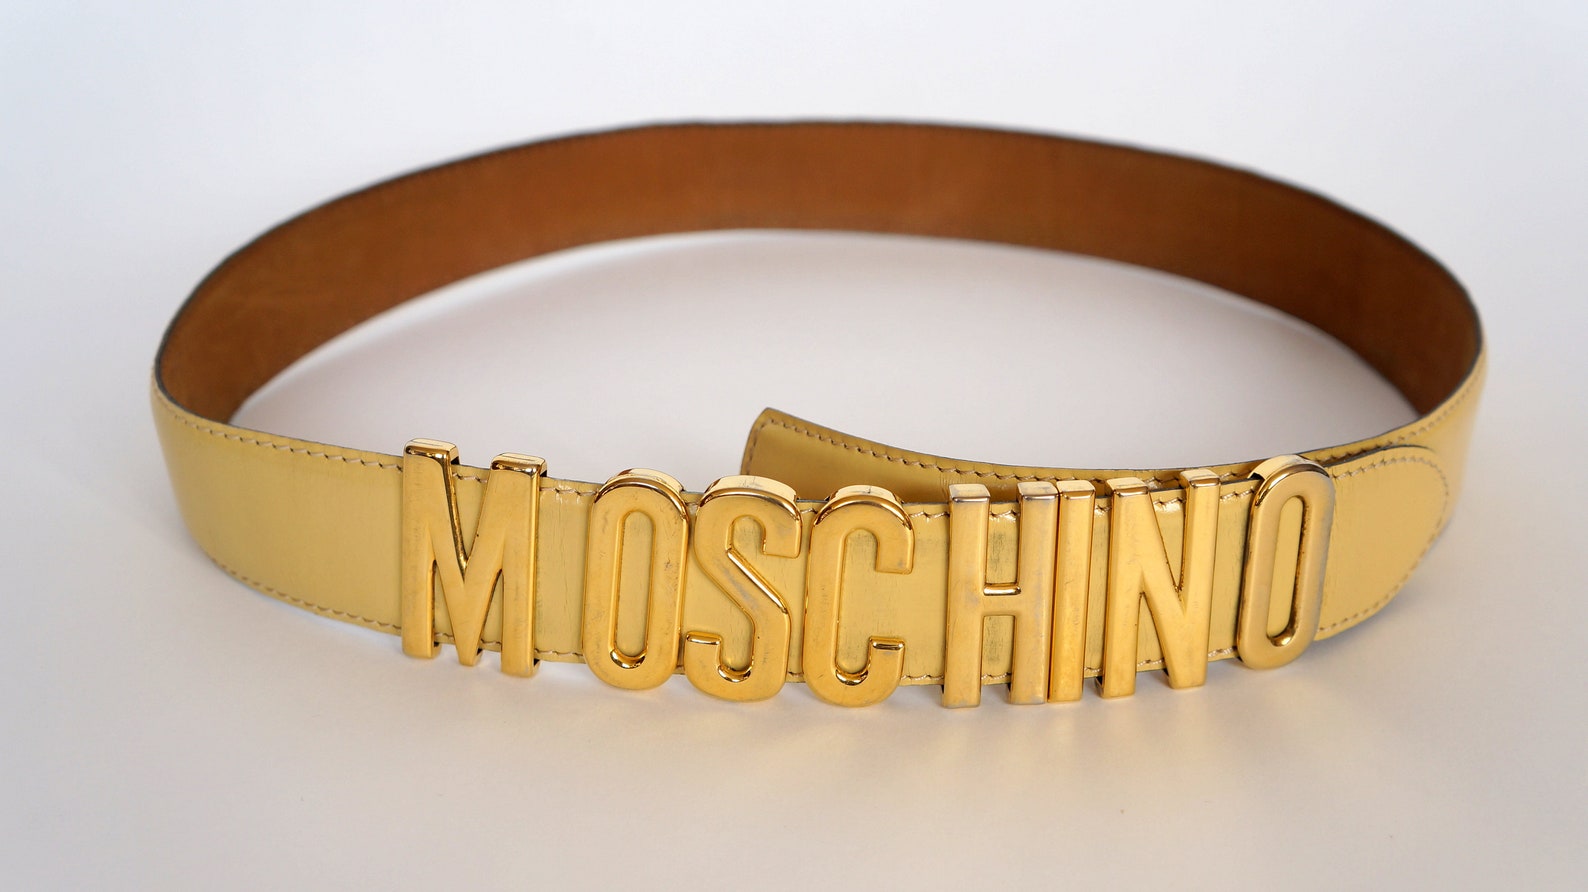 Vintage Moschino belt letters Redwall gift for her leather | Etsy